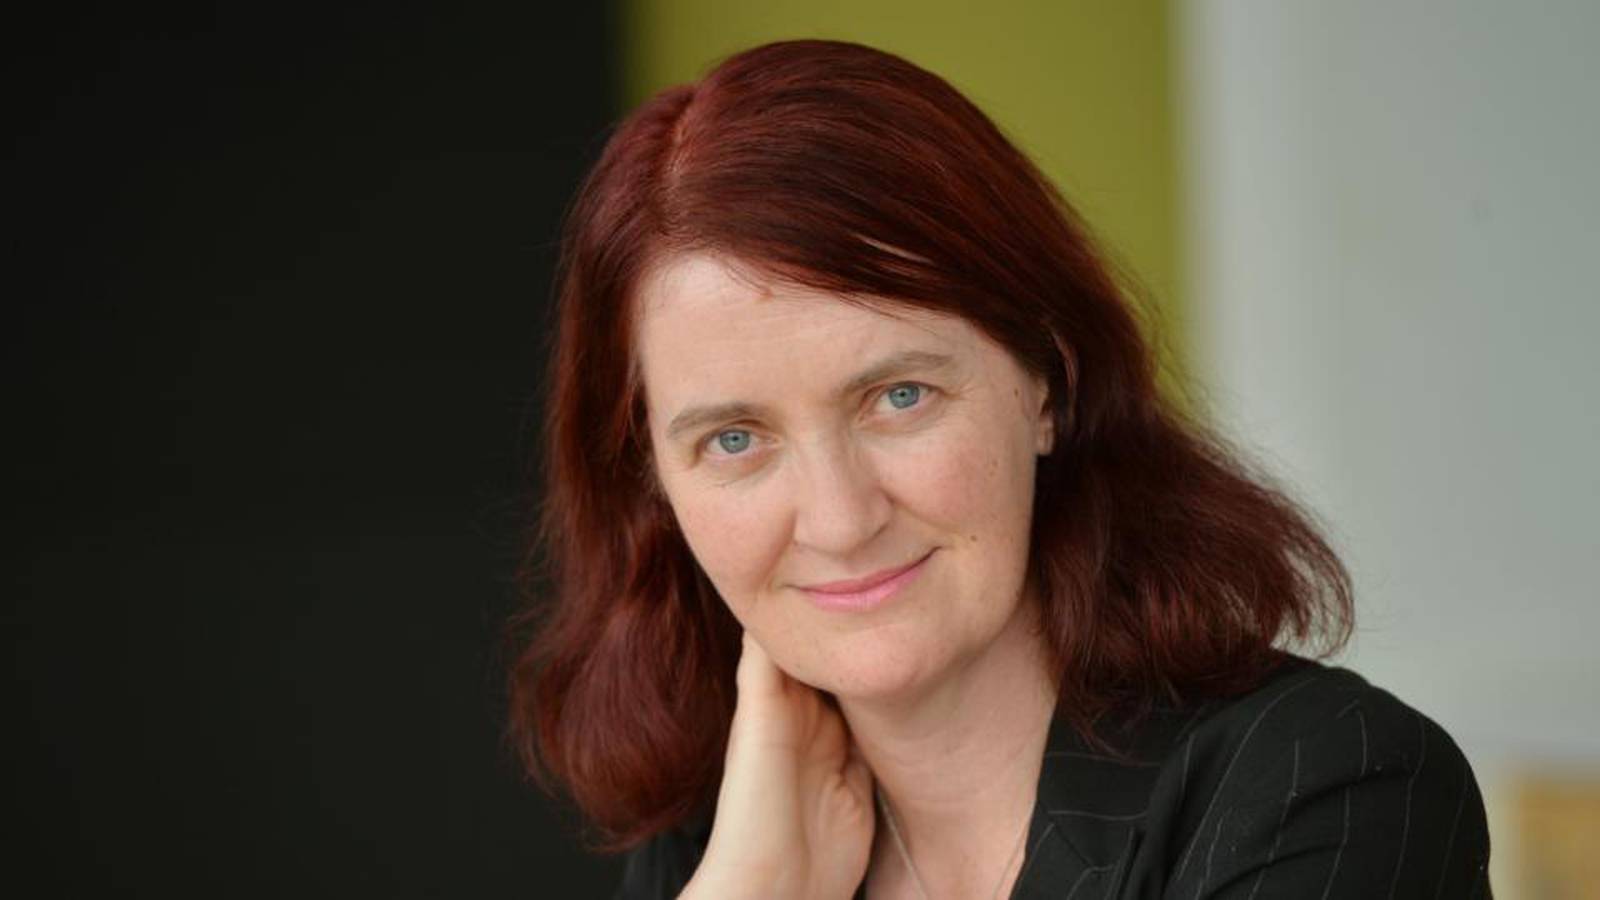 Emma Donoghue: ‘When I have an idea, I hurl myself at it’ – The Irish Times